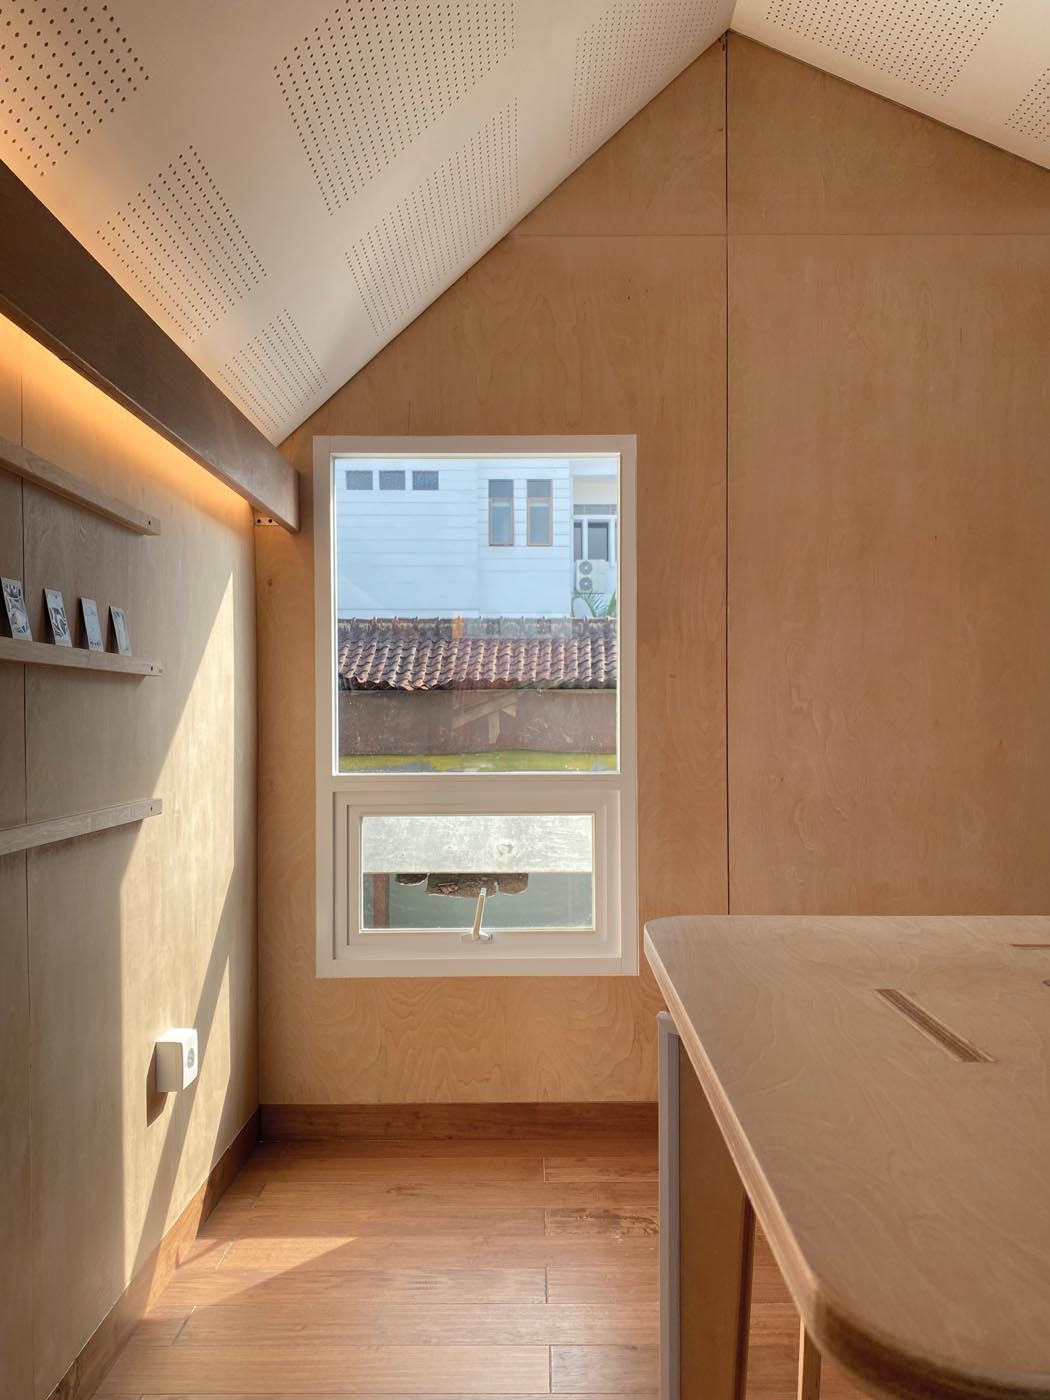 Aaksen Responsible Aarchitecture Designs a Modular Micro House Buildable Within Three Weeks